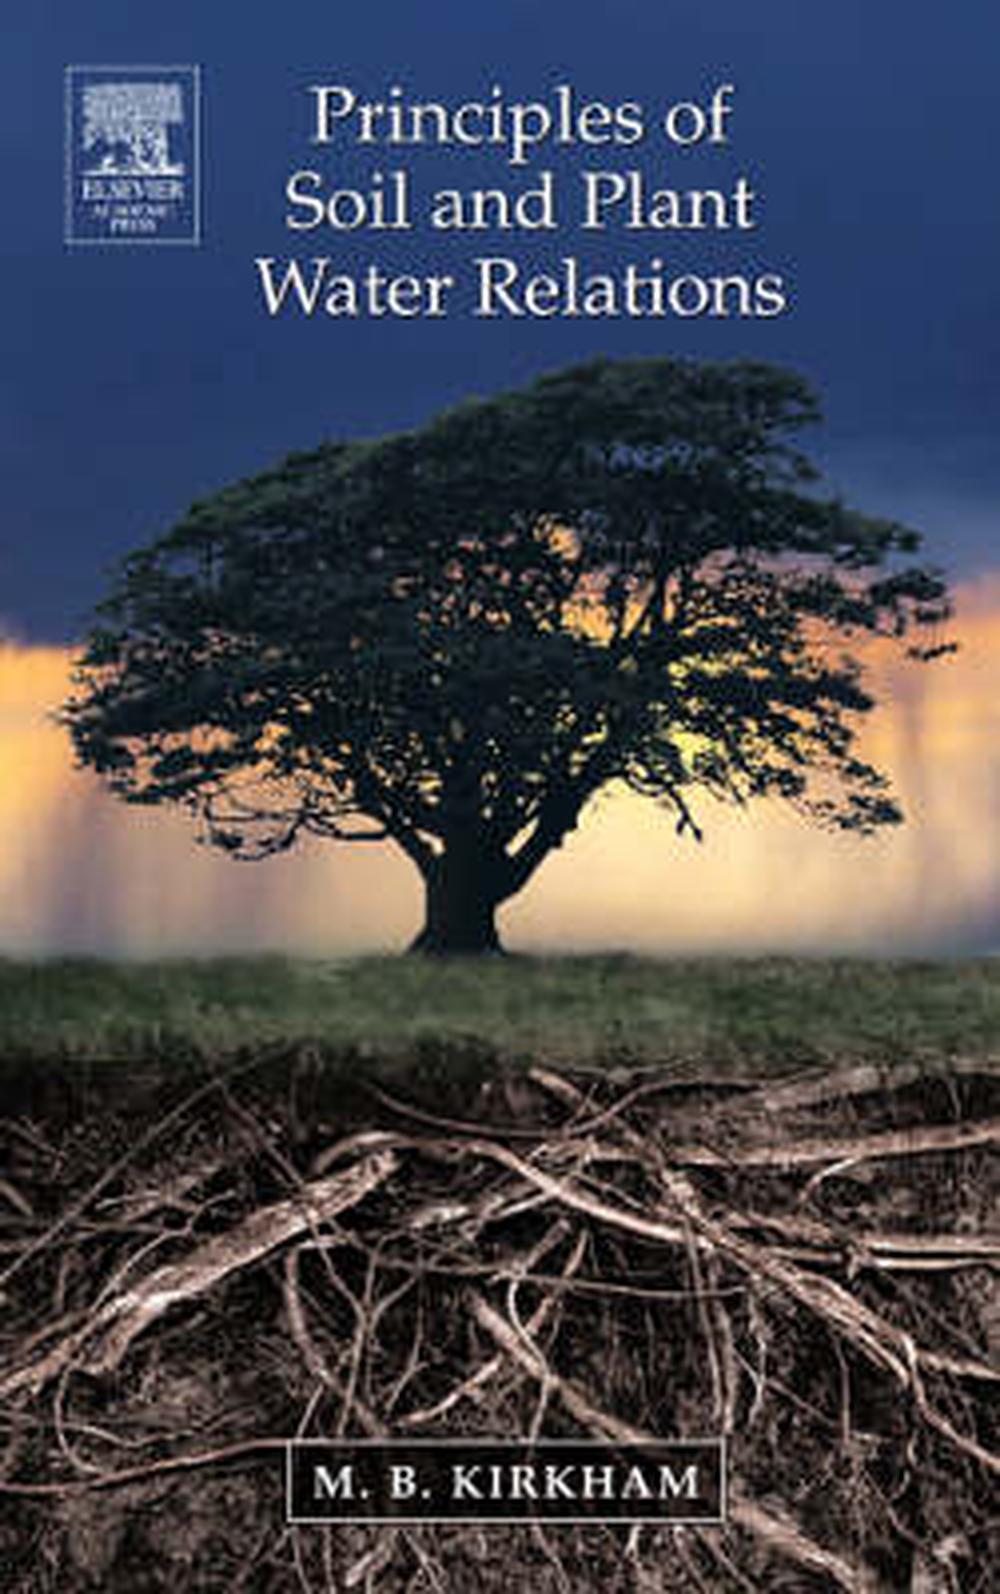 Principles of Soil and Plant Water Relations by M.B. Kirkham (English) Hardcover 9780124097513